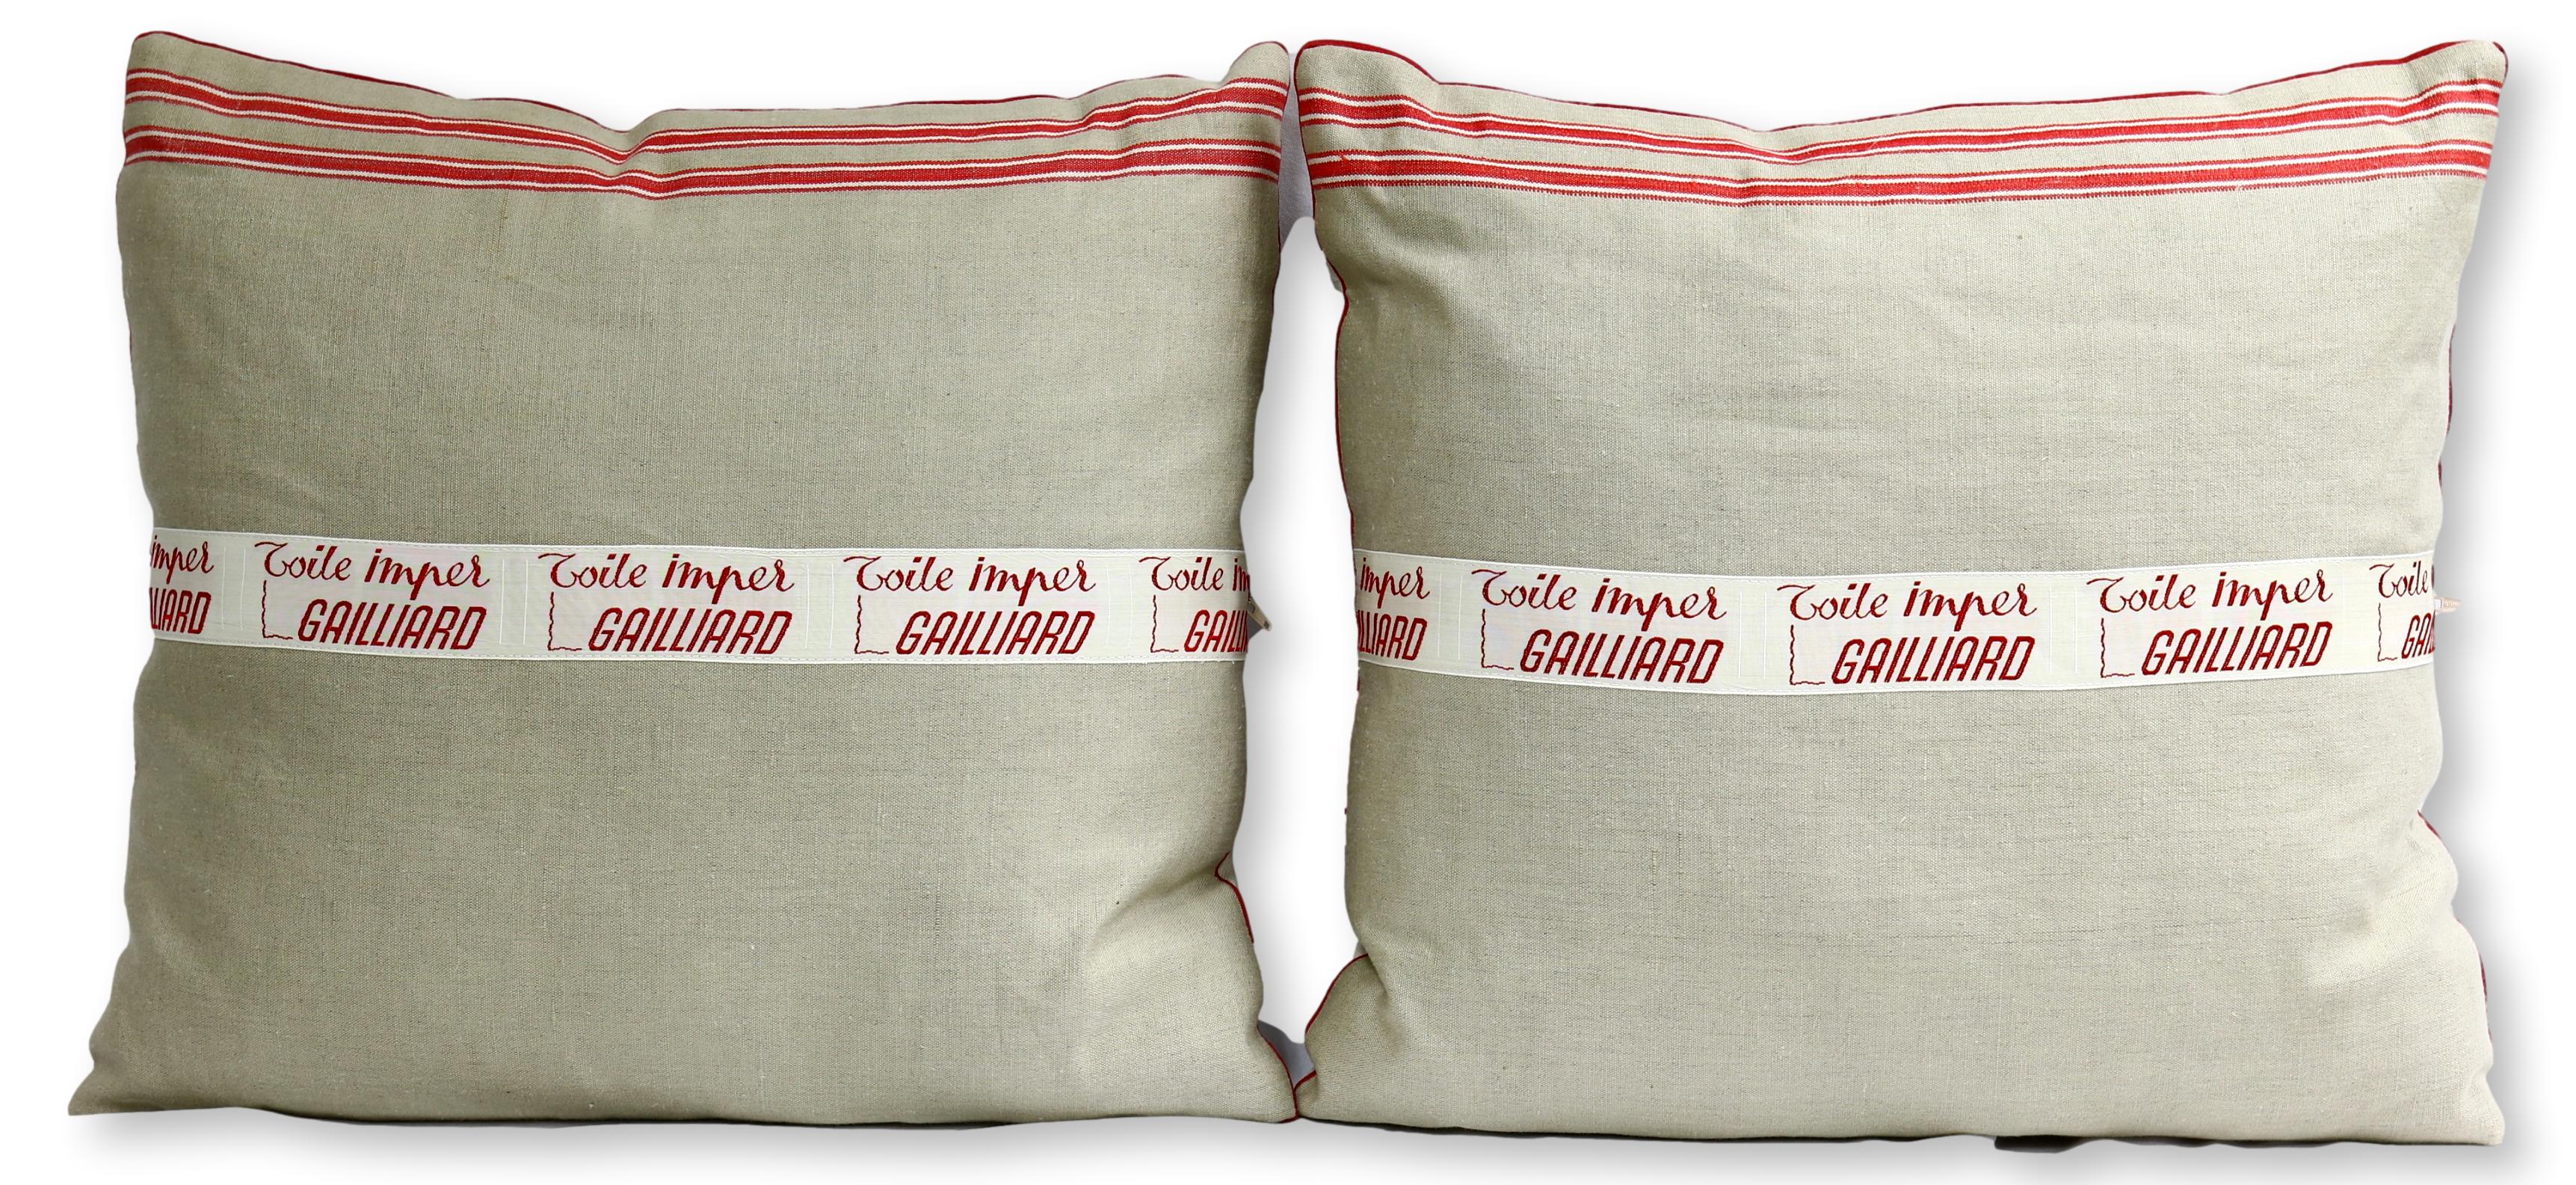 Vintage French Linen Pillows, Pair~P77638103